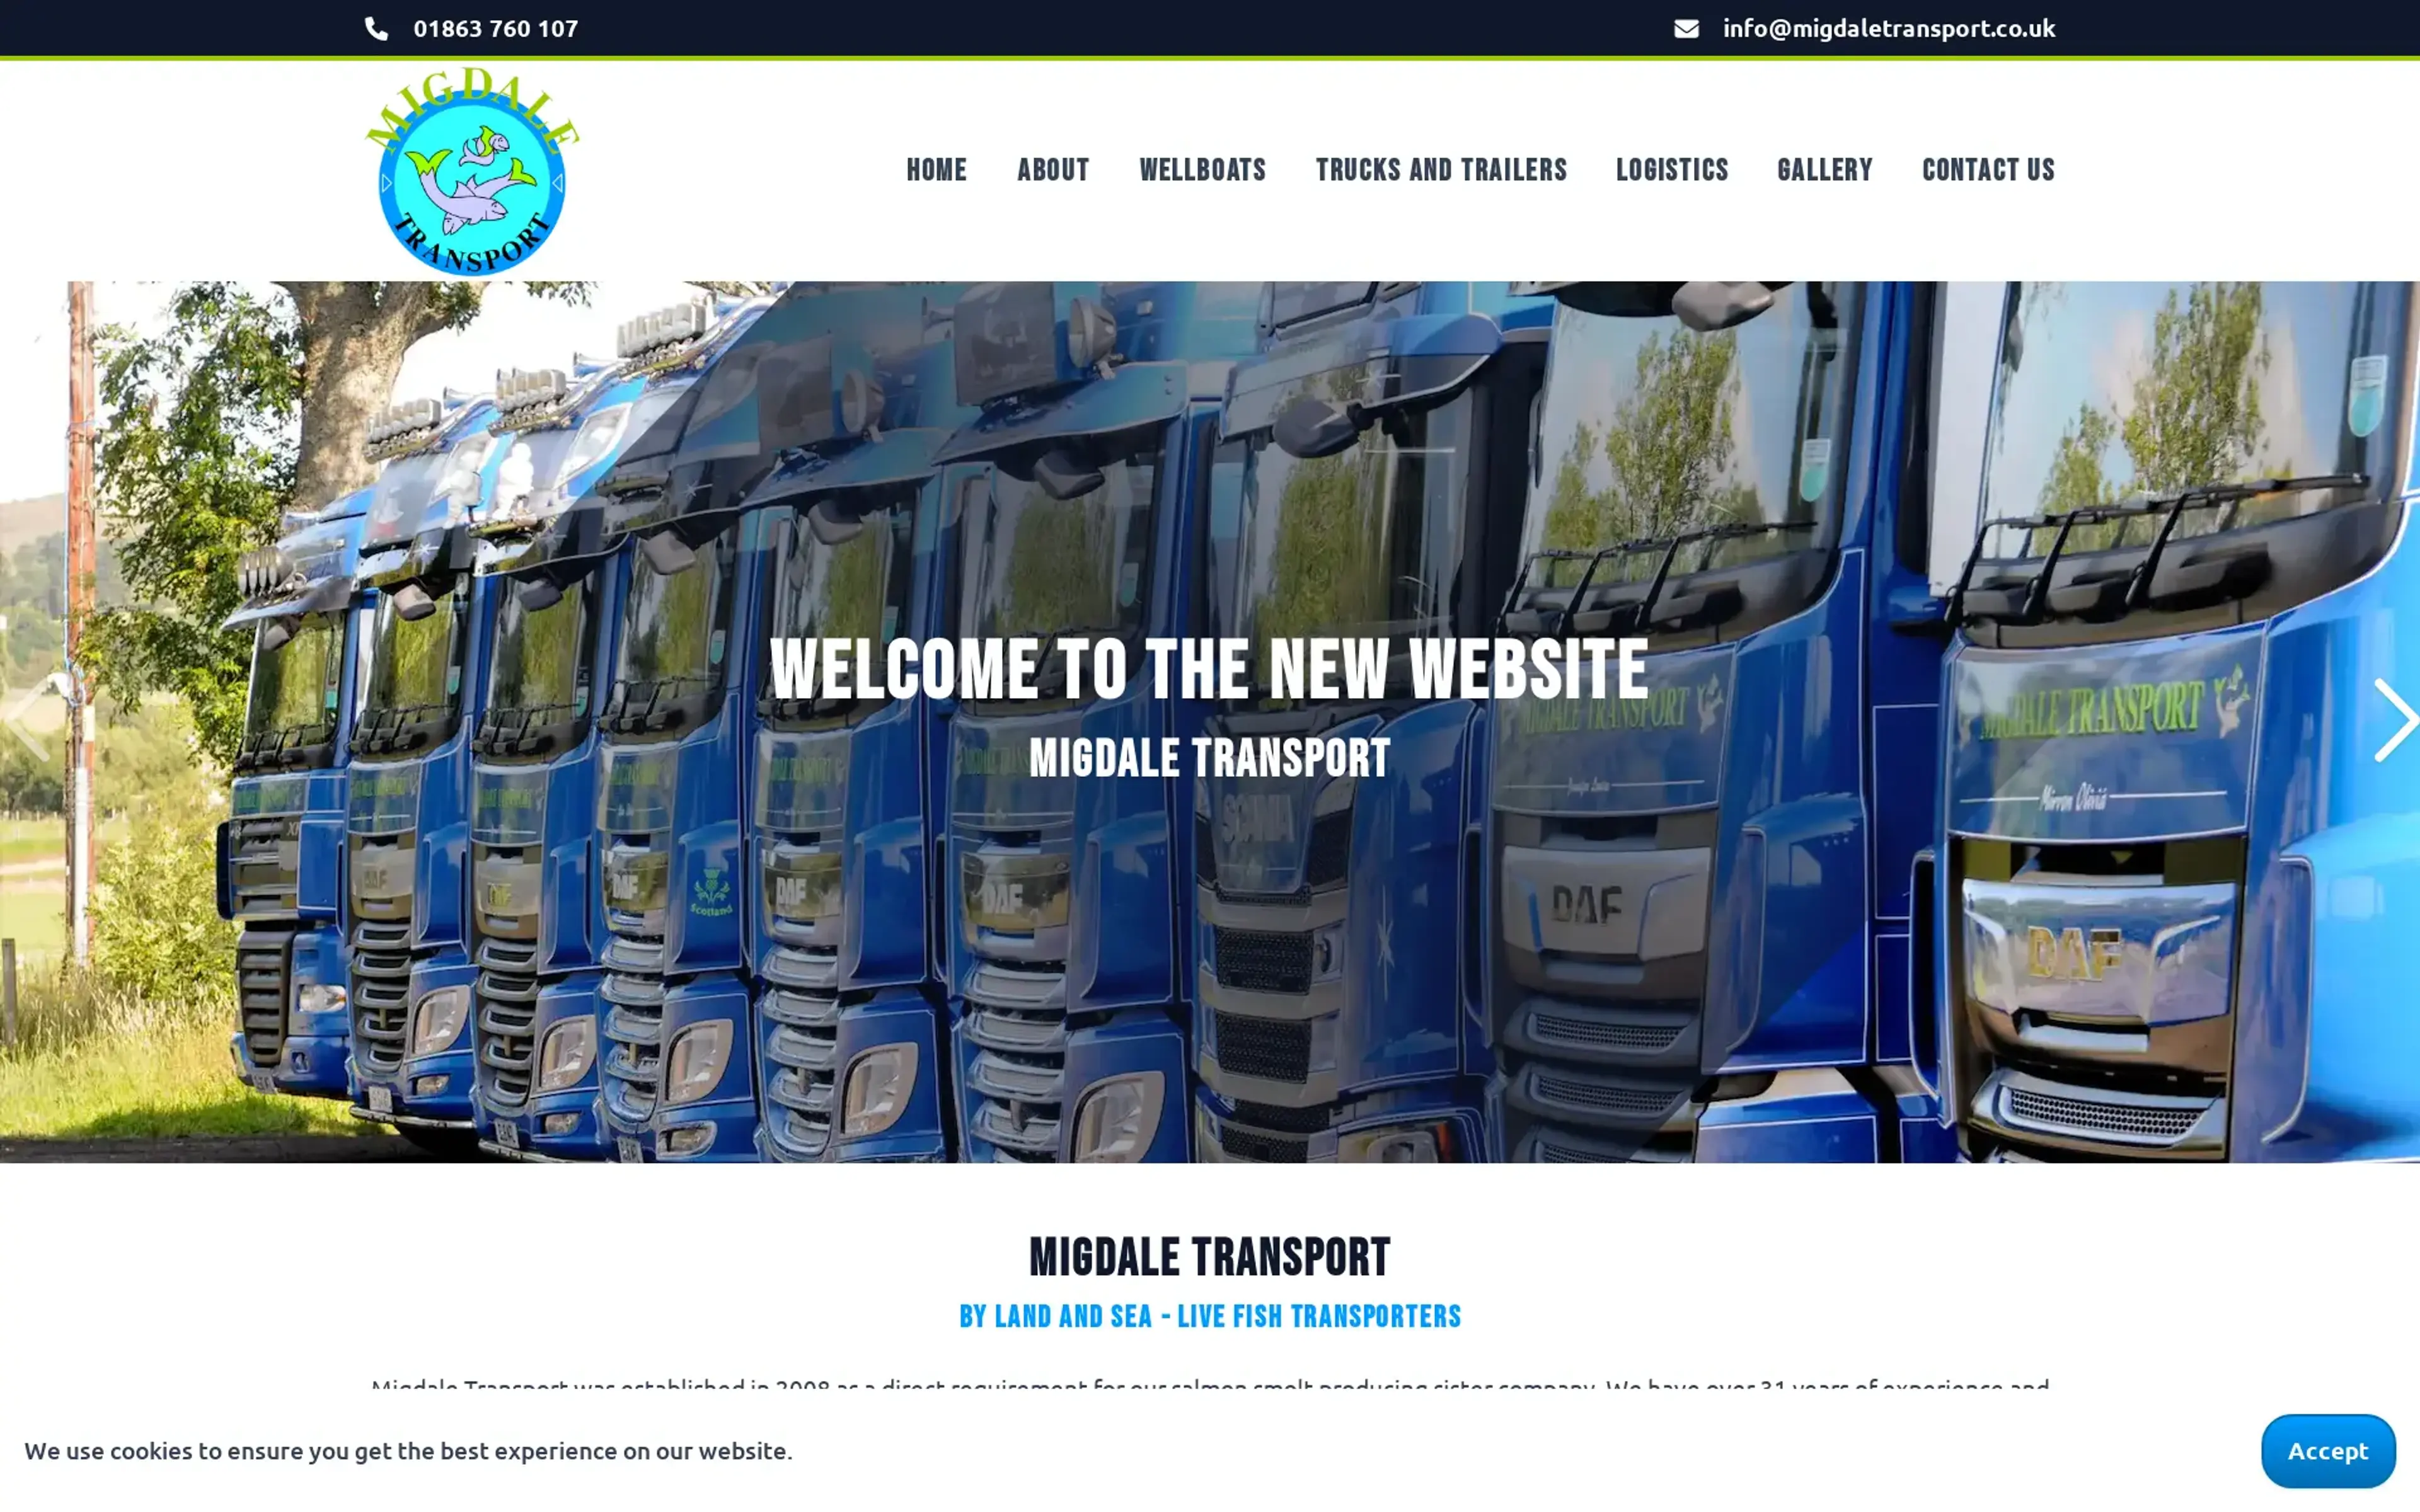 Recent project we worked on for Migdale Transport